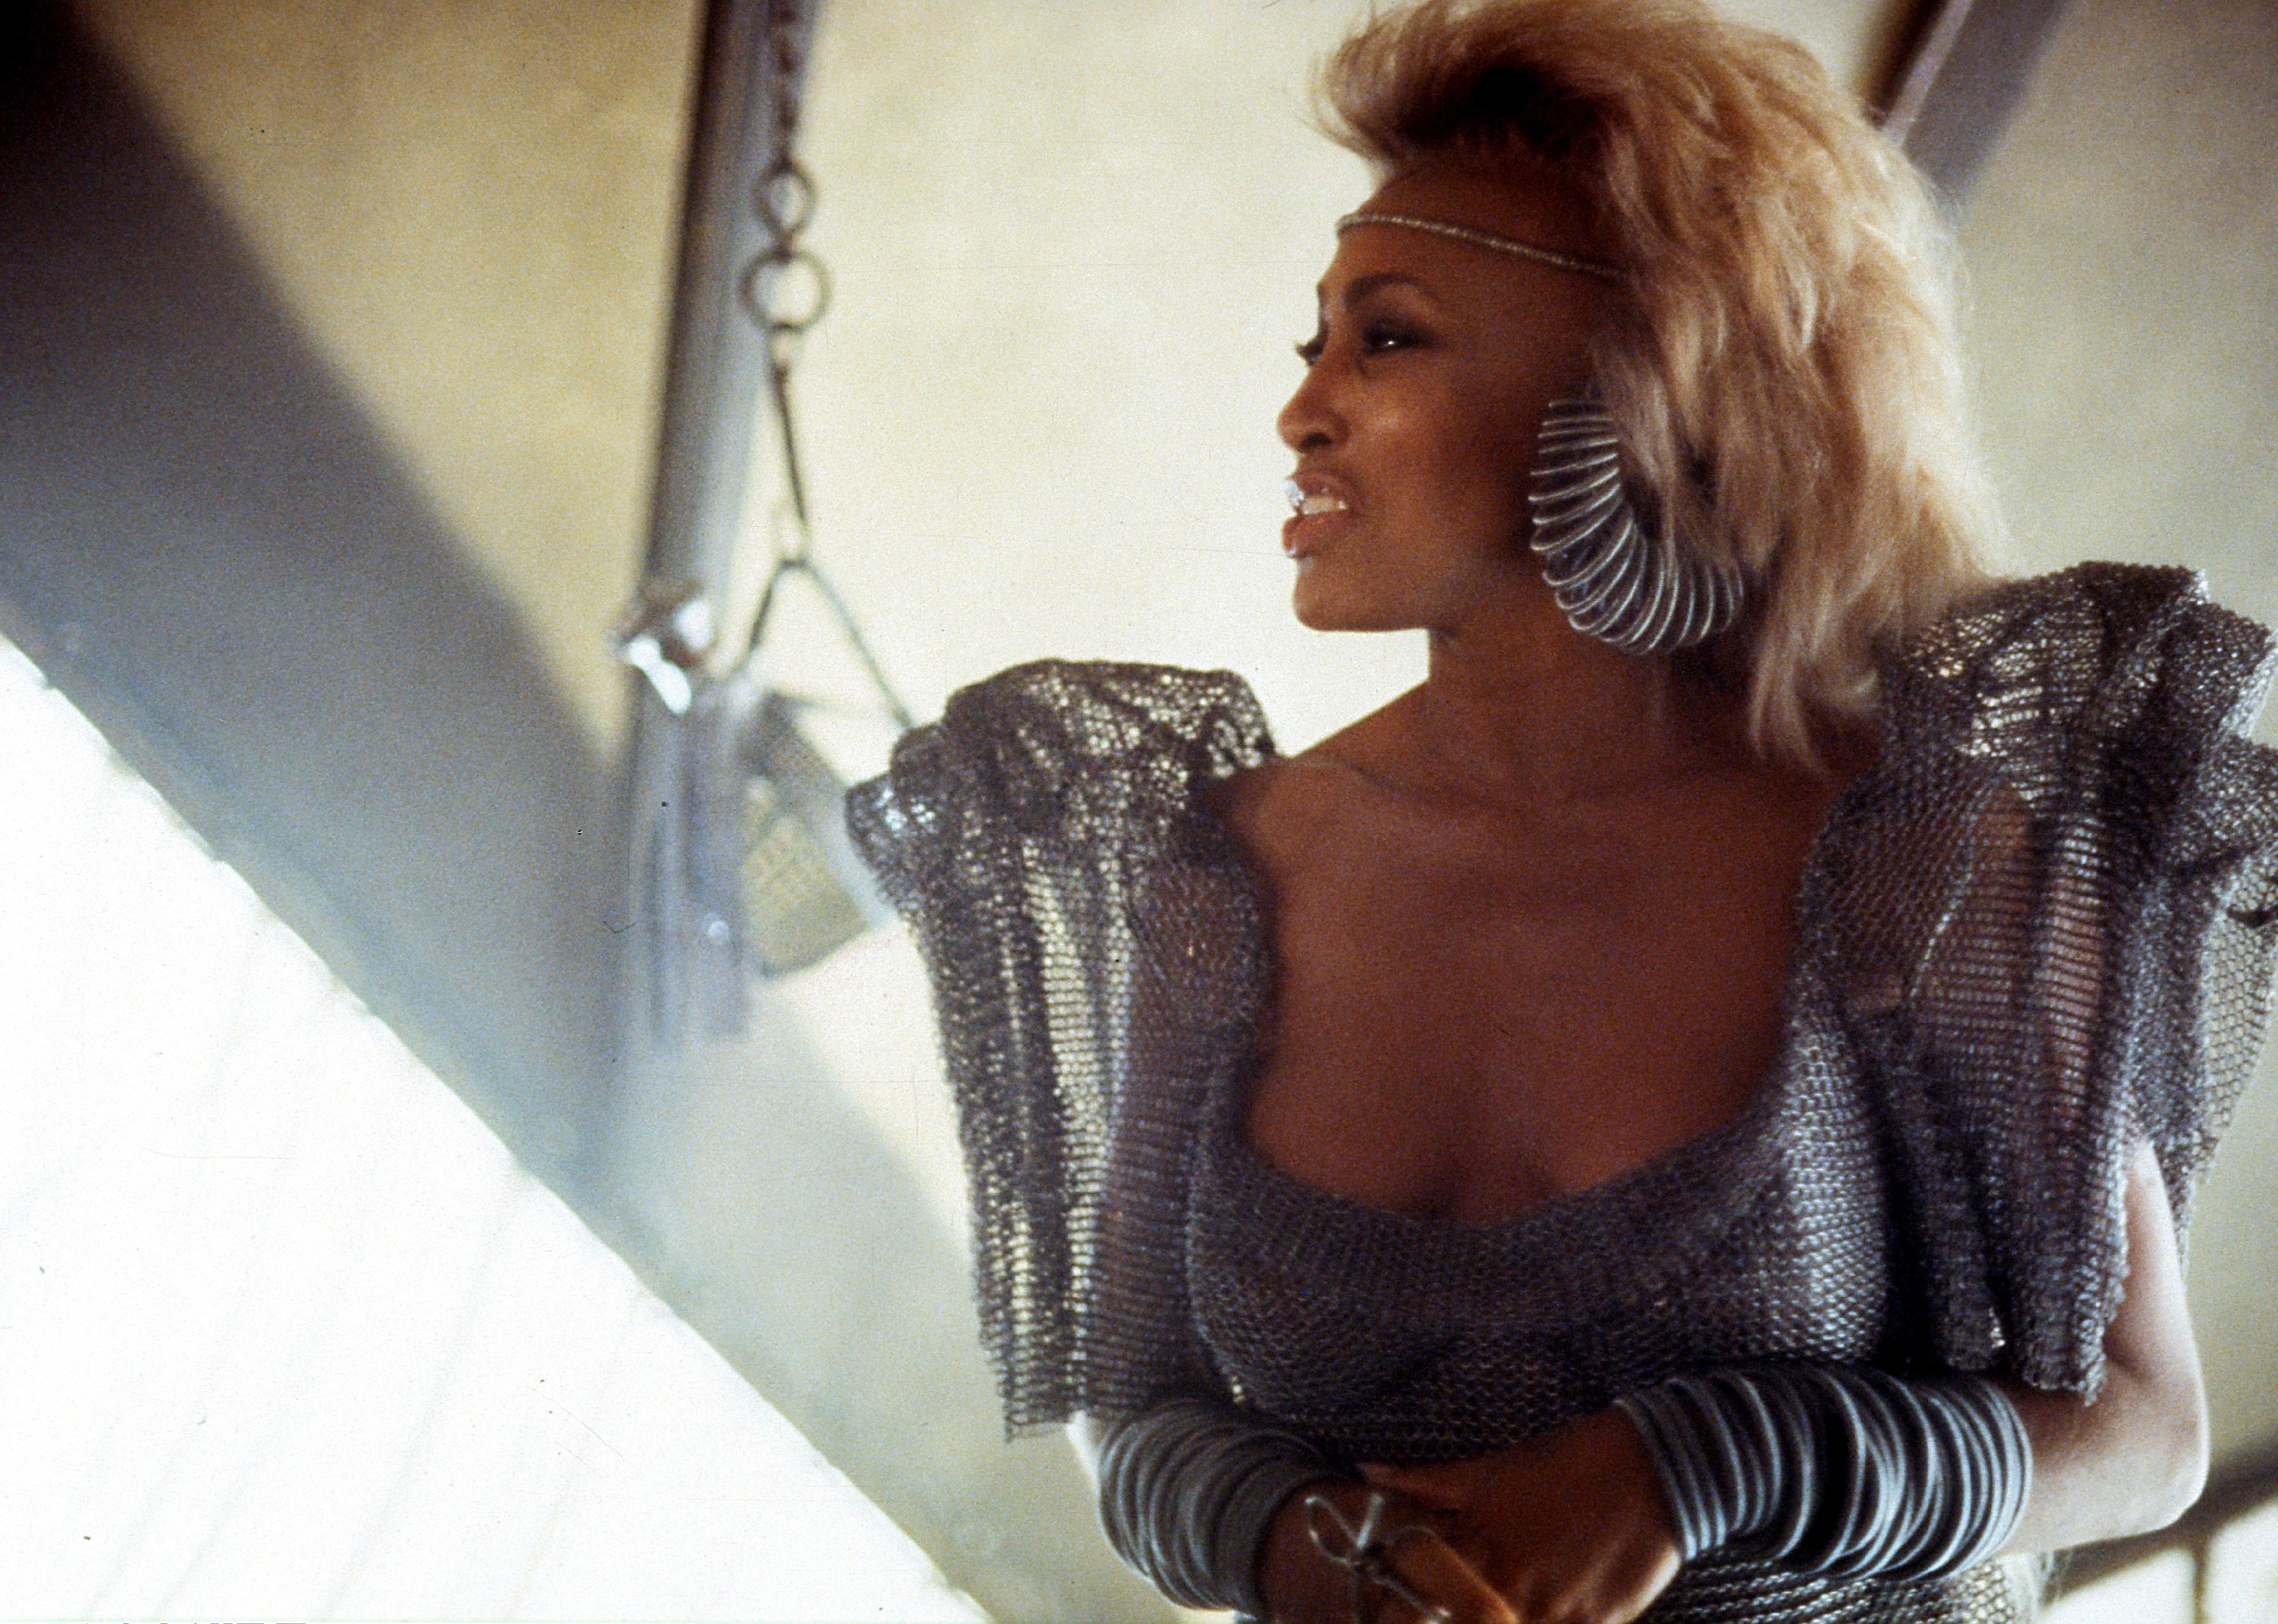 Tina Turner wearing silver attire in a scene from the film 'Mad Max: Beyond Thunderdome', 1985.